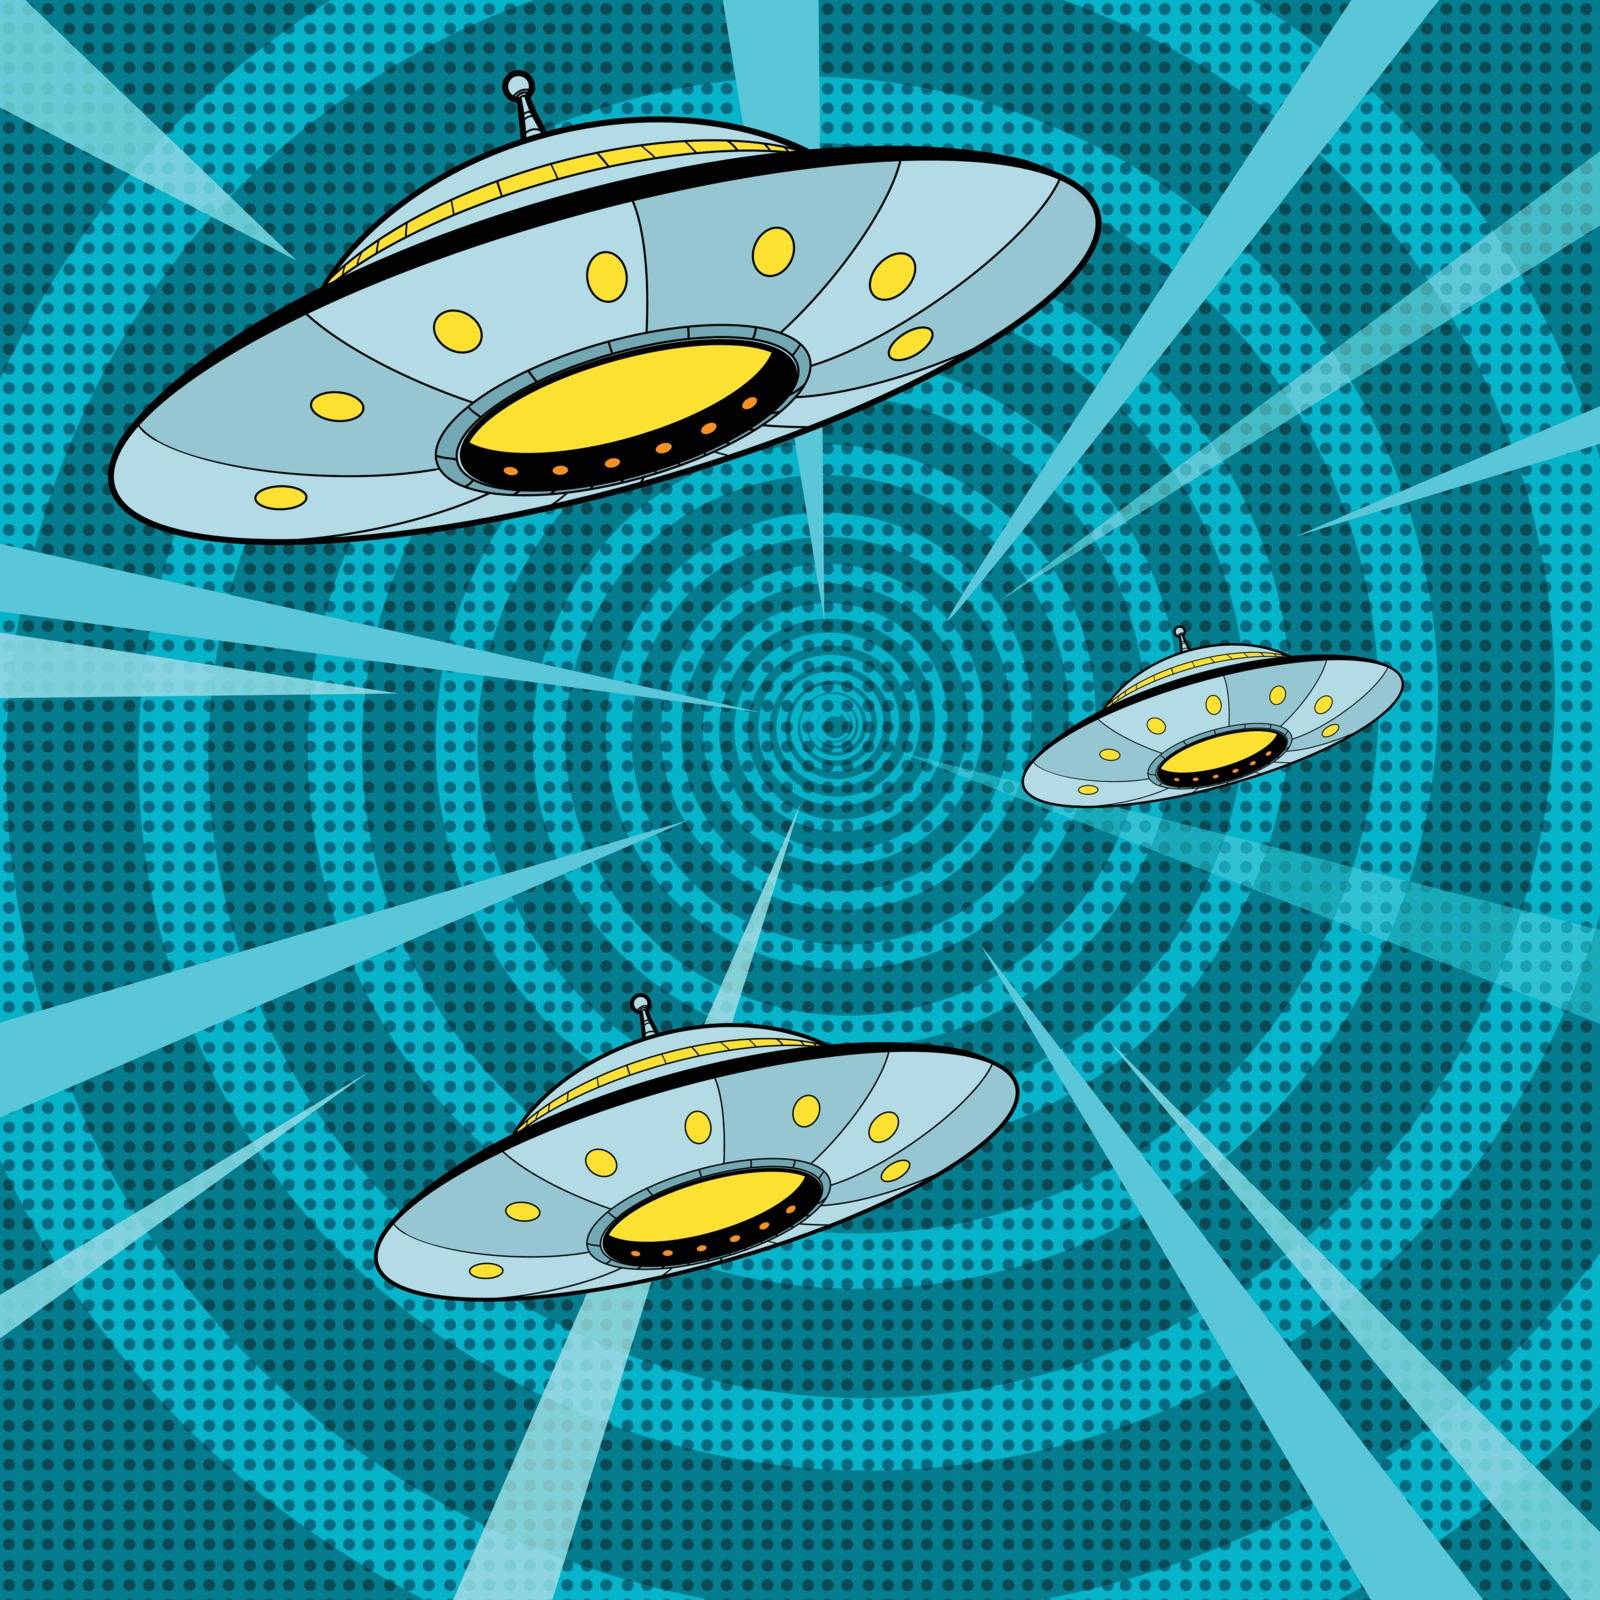 Space attack UFO, pop art retro vector illustration. The alien ships quickly fly